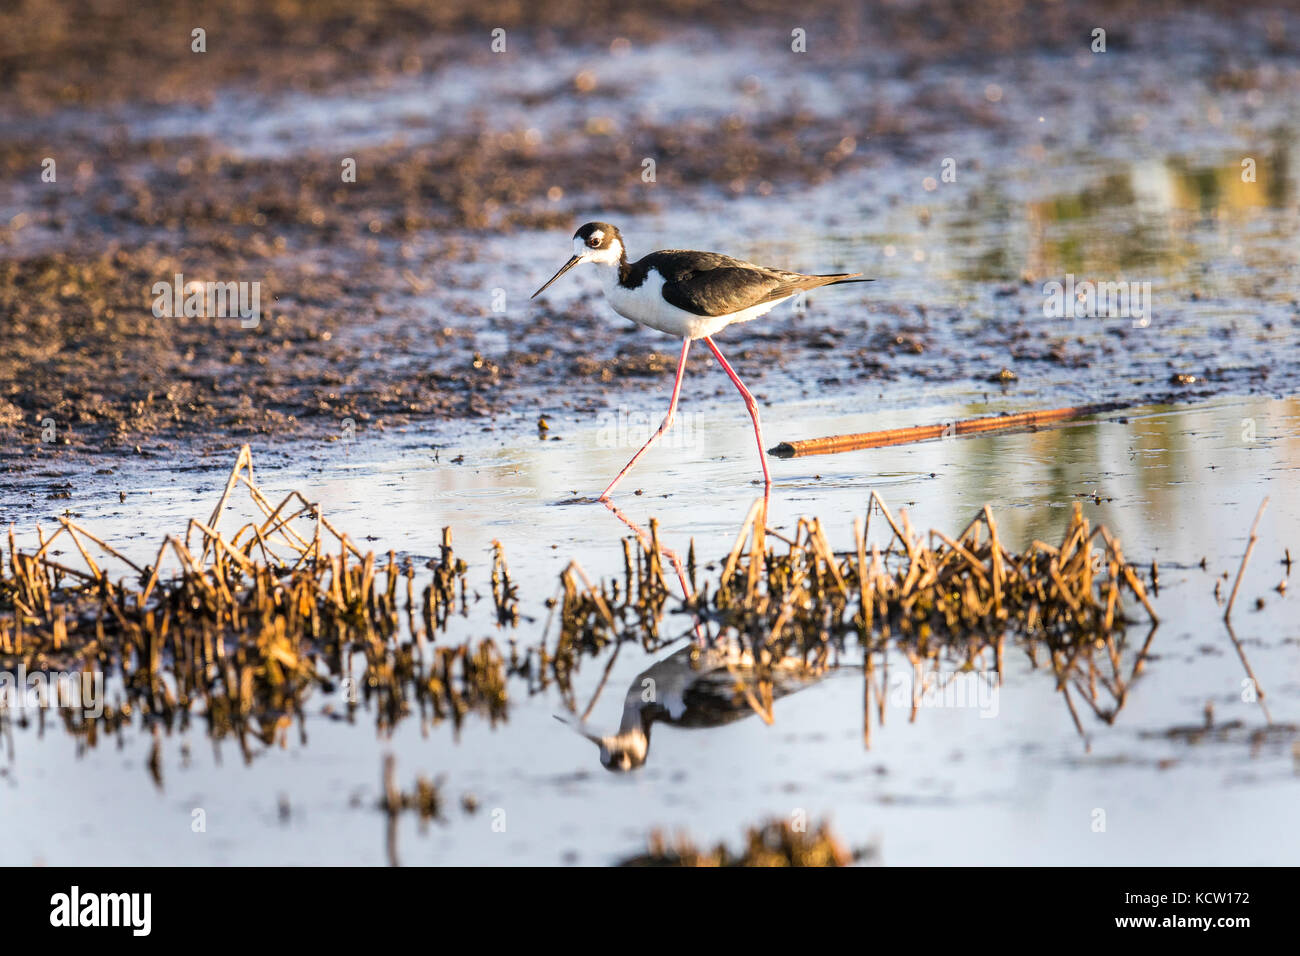 Black-necked Stilt (Himantopus mexicanus) Colorful, with reflection in water, searching for food. Weed Lake, Alberta, Canada Stock Photo